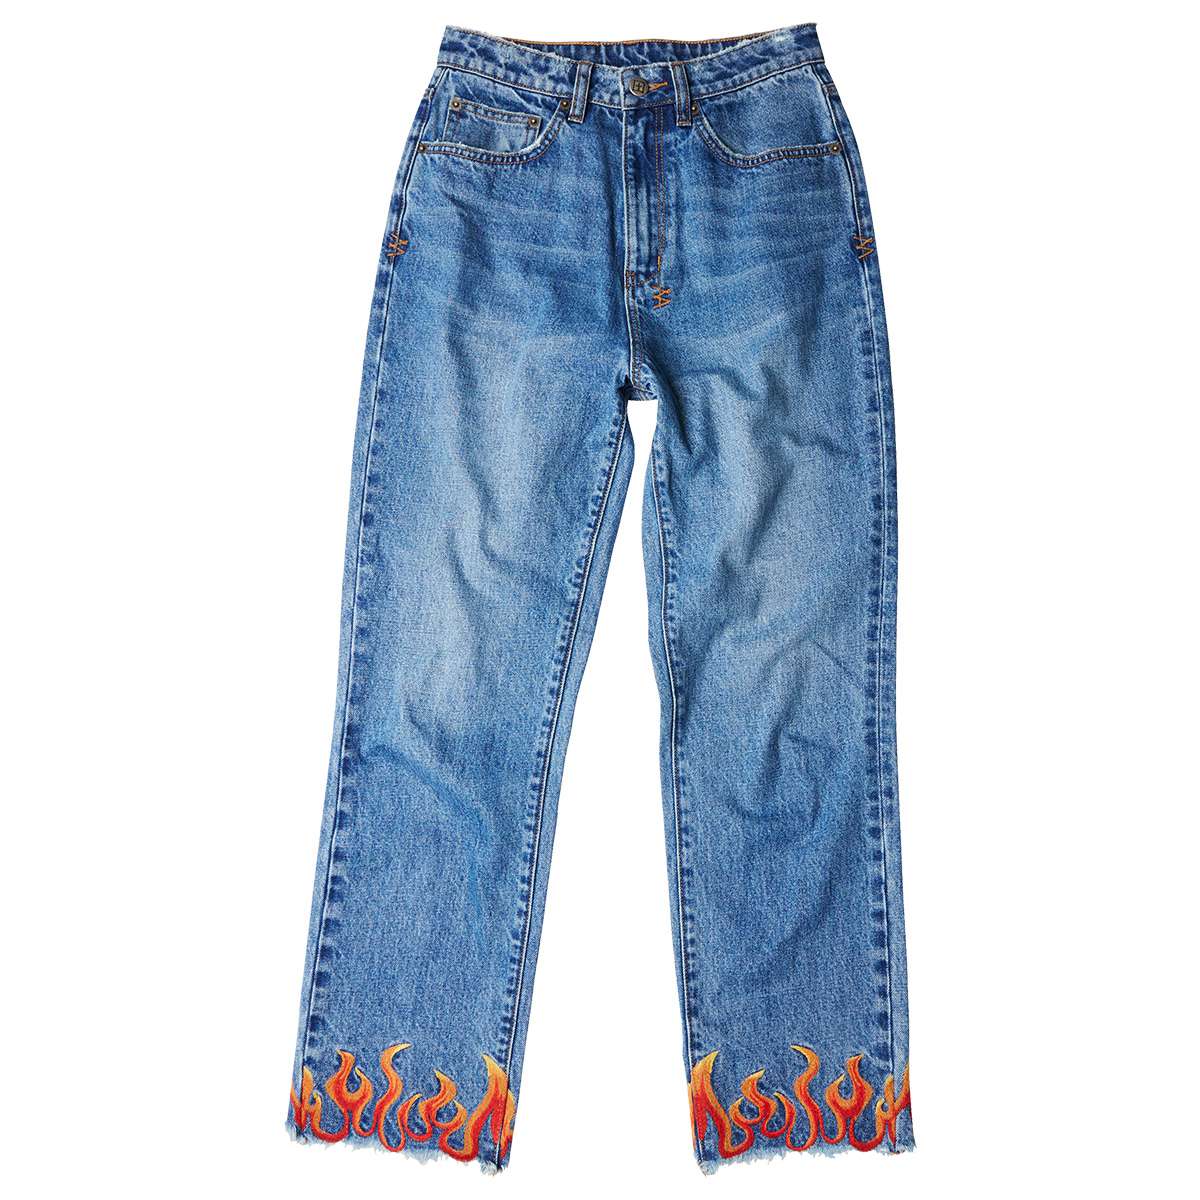 The Embroidered Hem Jean